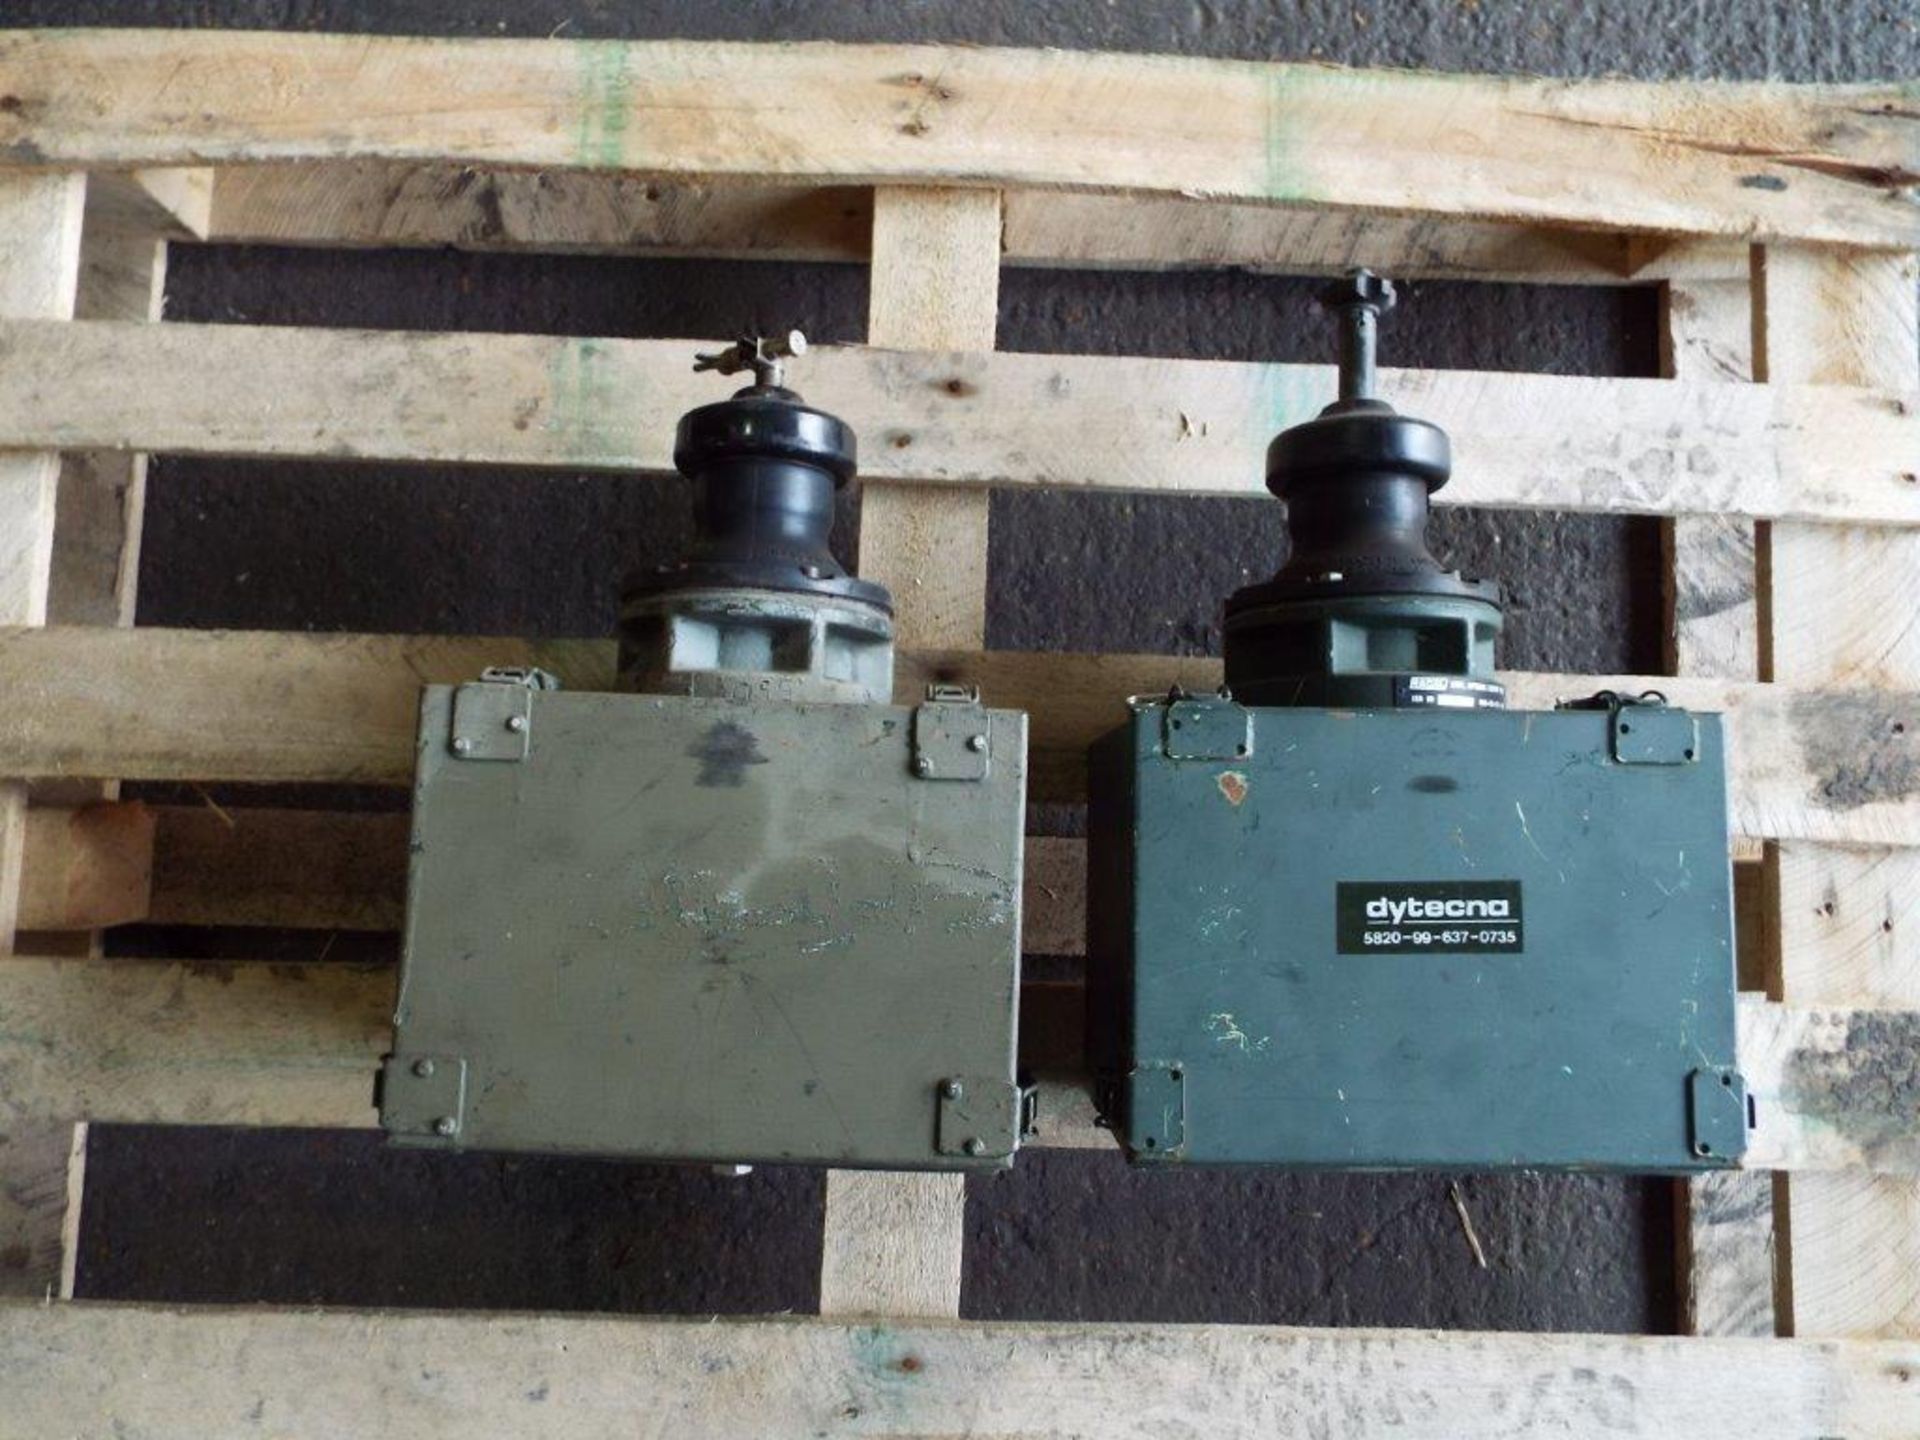 2 x Land Rover ATU Wing Boxes Complete with Aerial Bases and Tuaam's